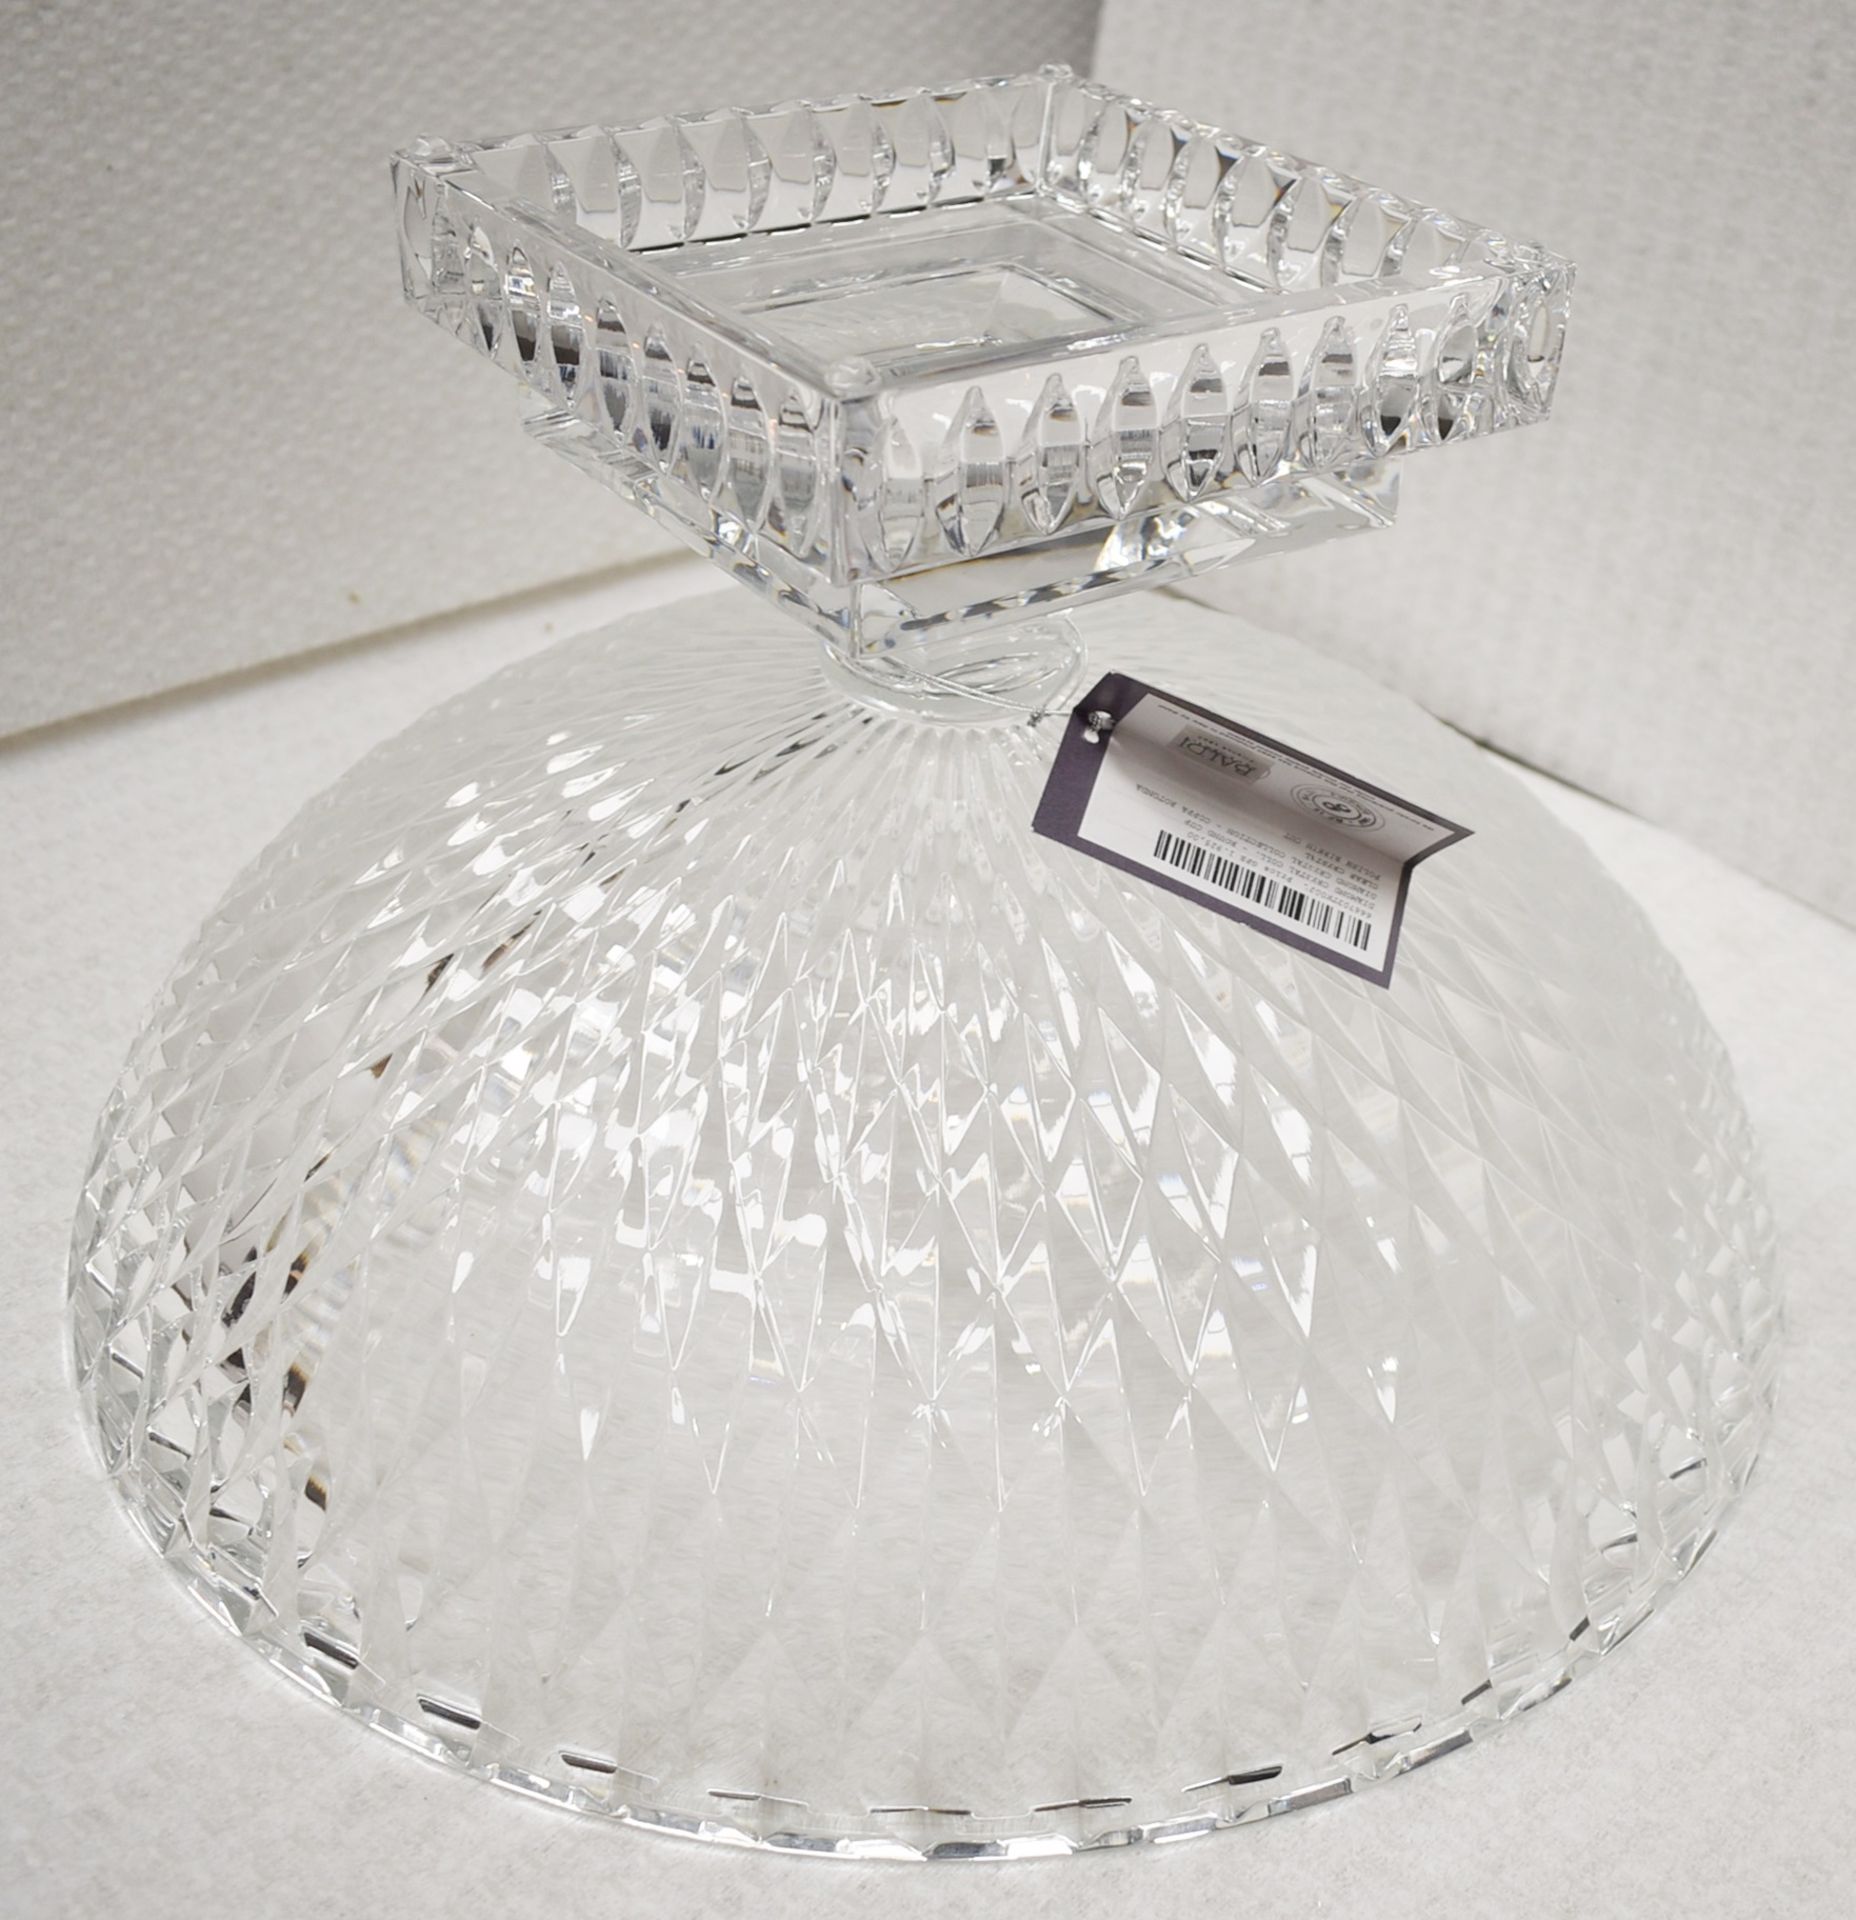 1 x BALDI 'Home Jewels' Italian Hand-crafted Artisan Large Round Clear Crystal Bowl - RRP £1,925 - Image 2 of 4